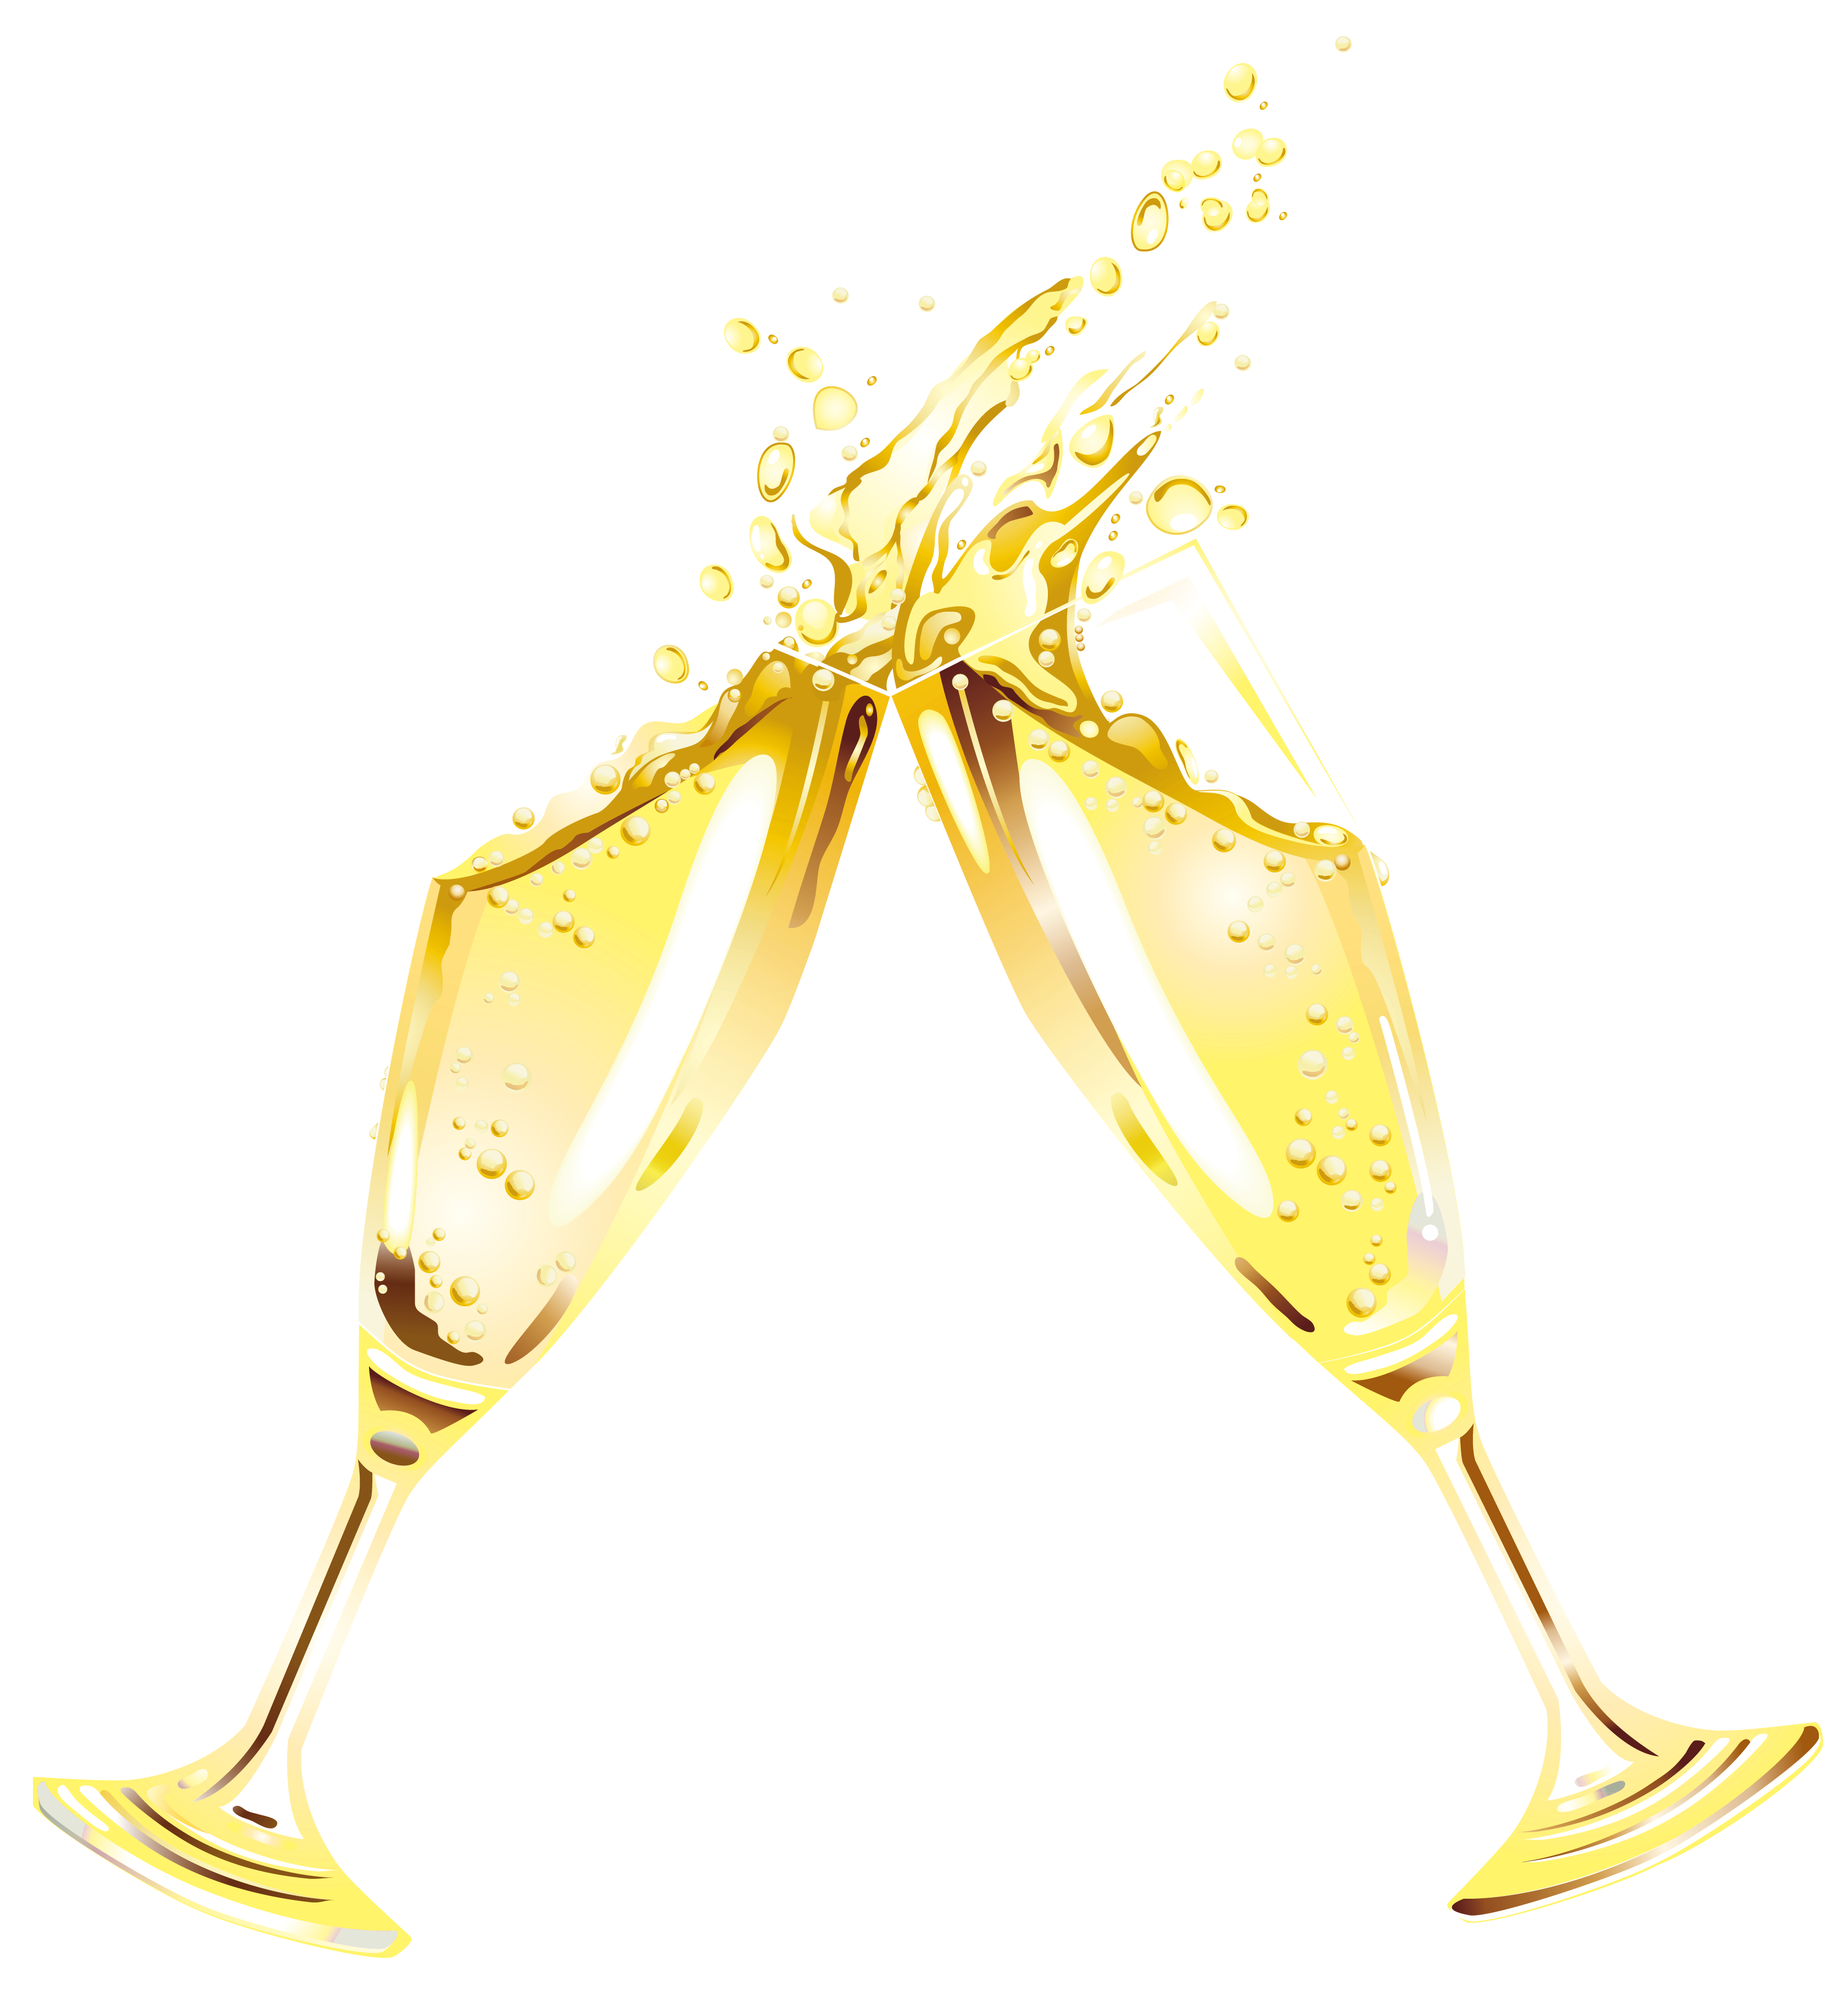 New year flutes gallery. Clipart glasses champagne